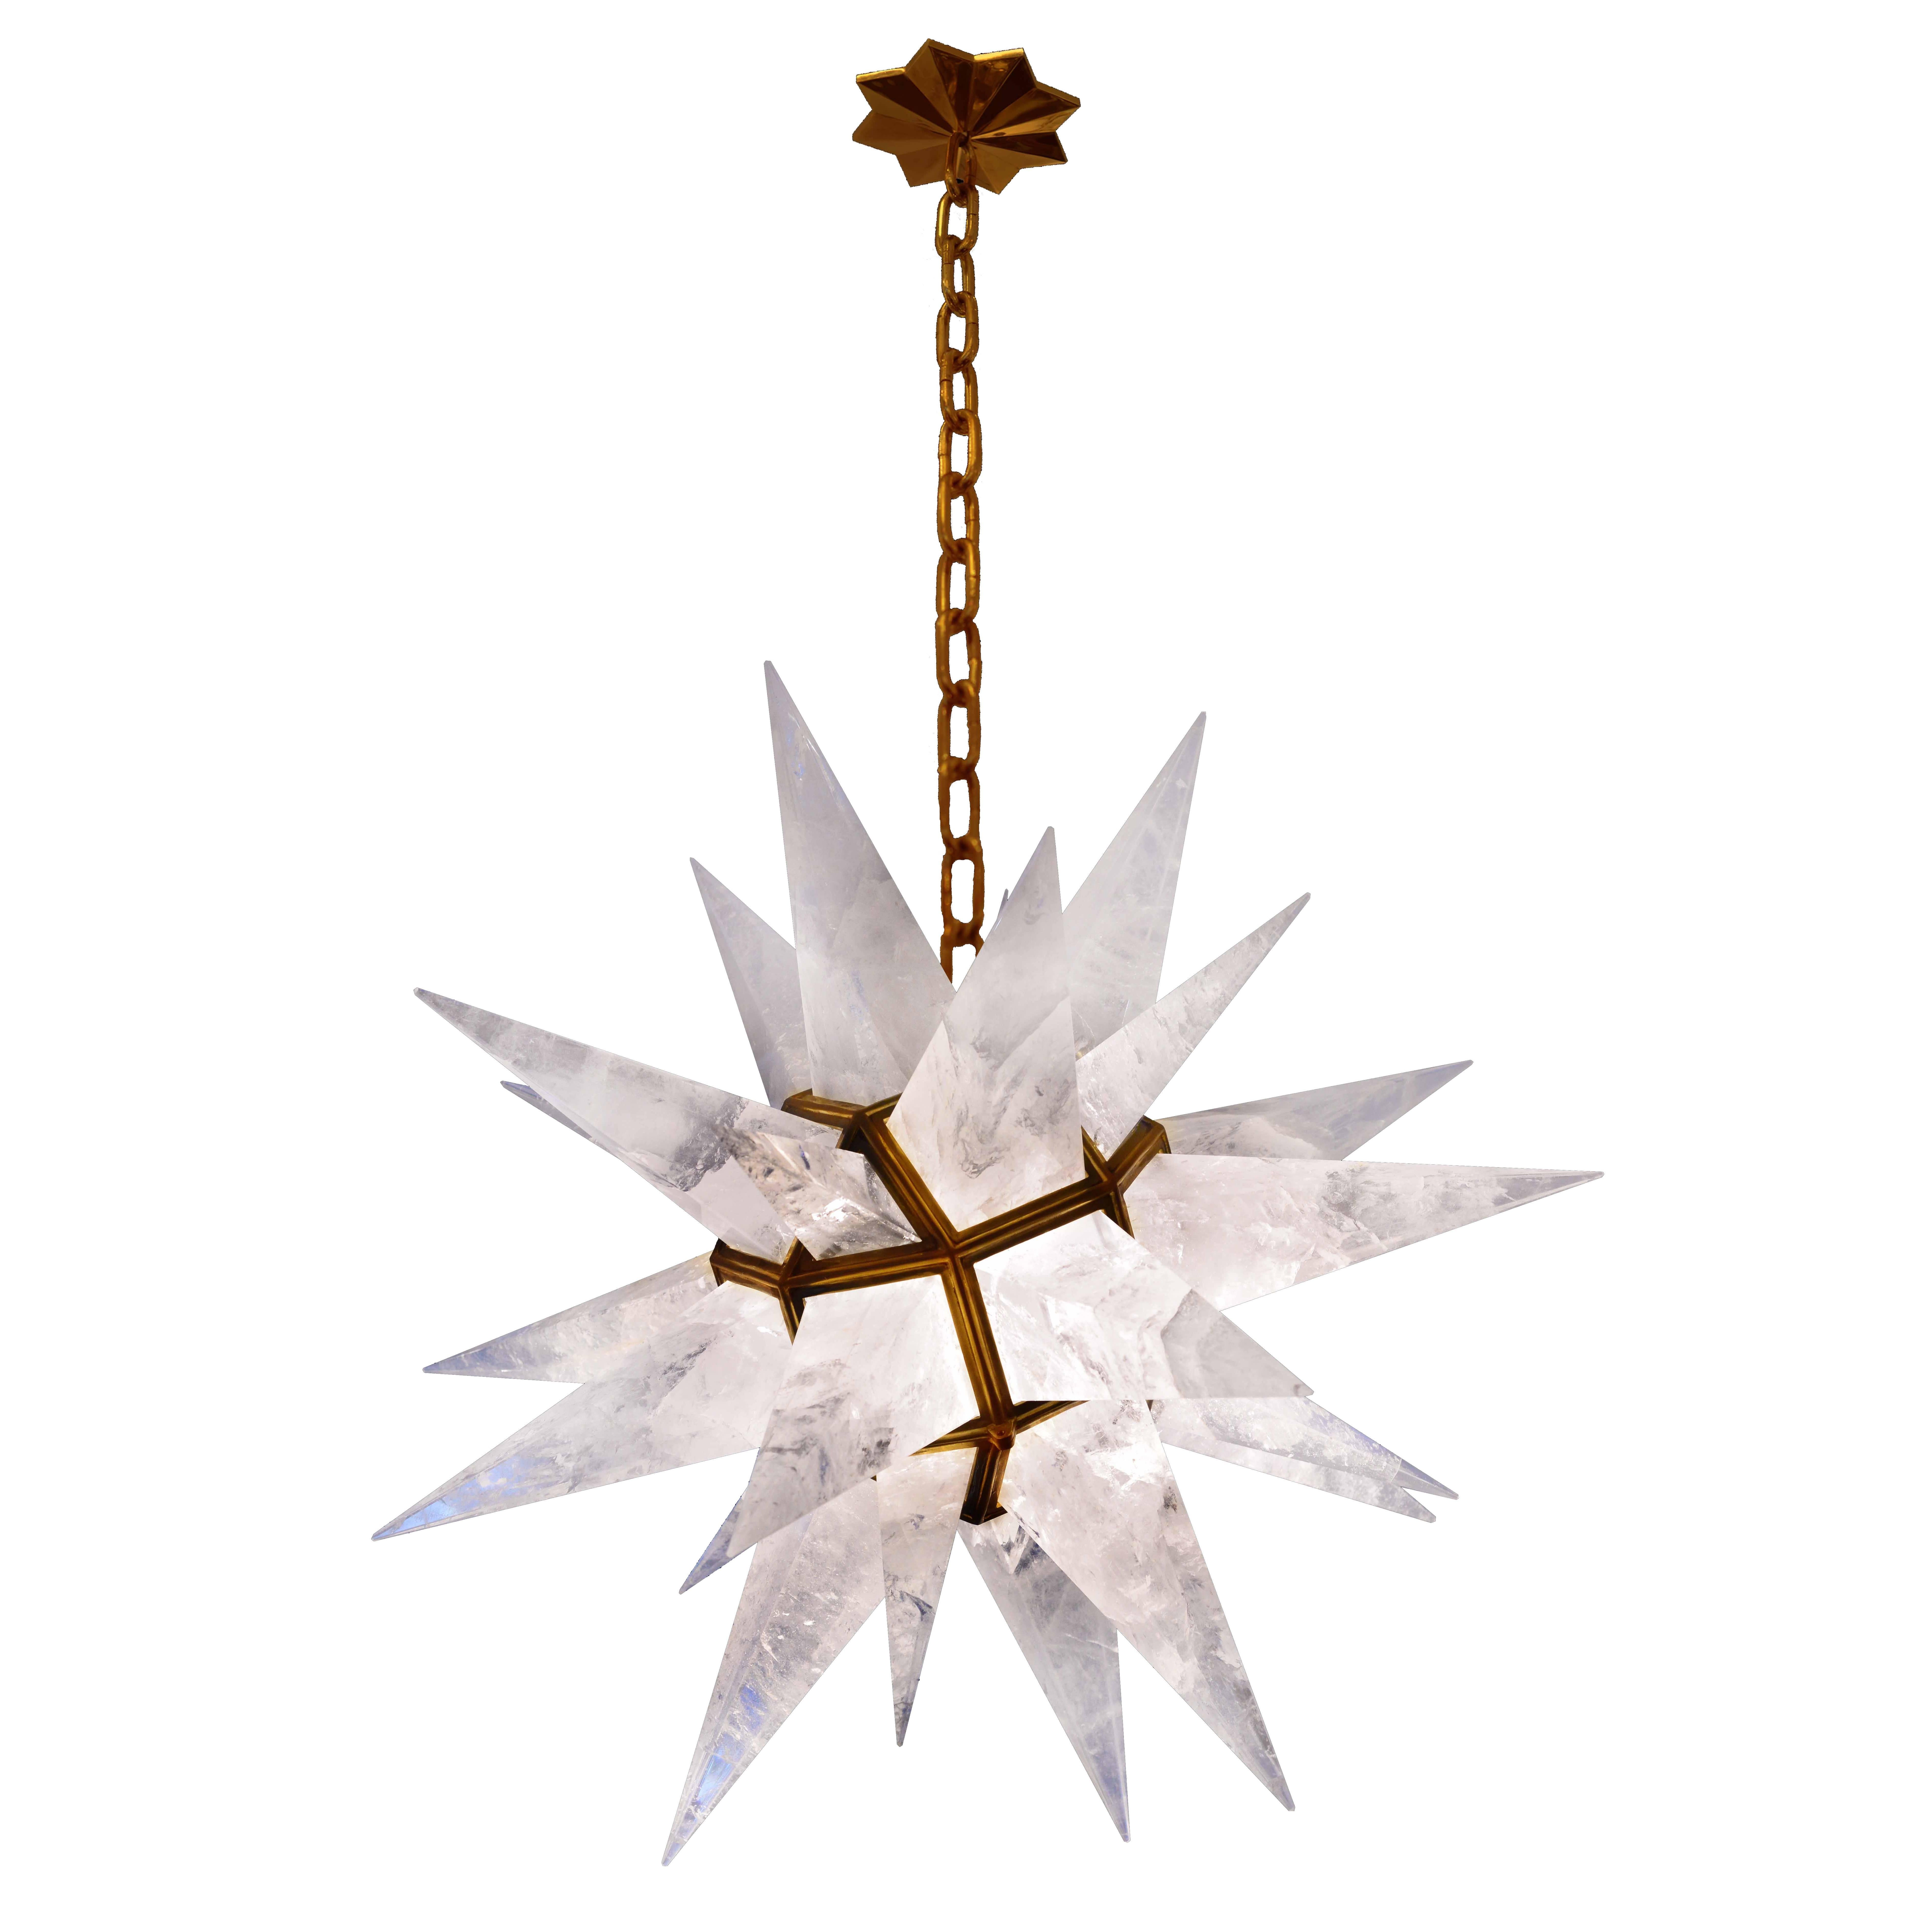 A fine carved star form rock crystal chandelier with antique brass finished frame, created by Phoenix Gallery.

Height can adjustable. 
Available in nickel plated frame. 
Available in 30